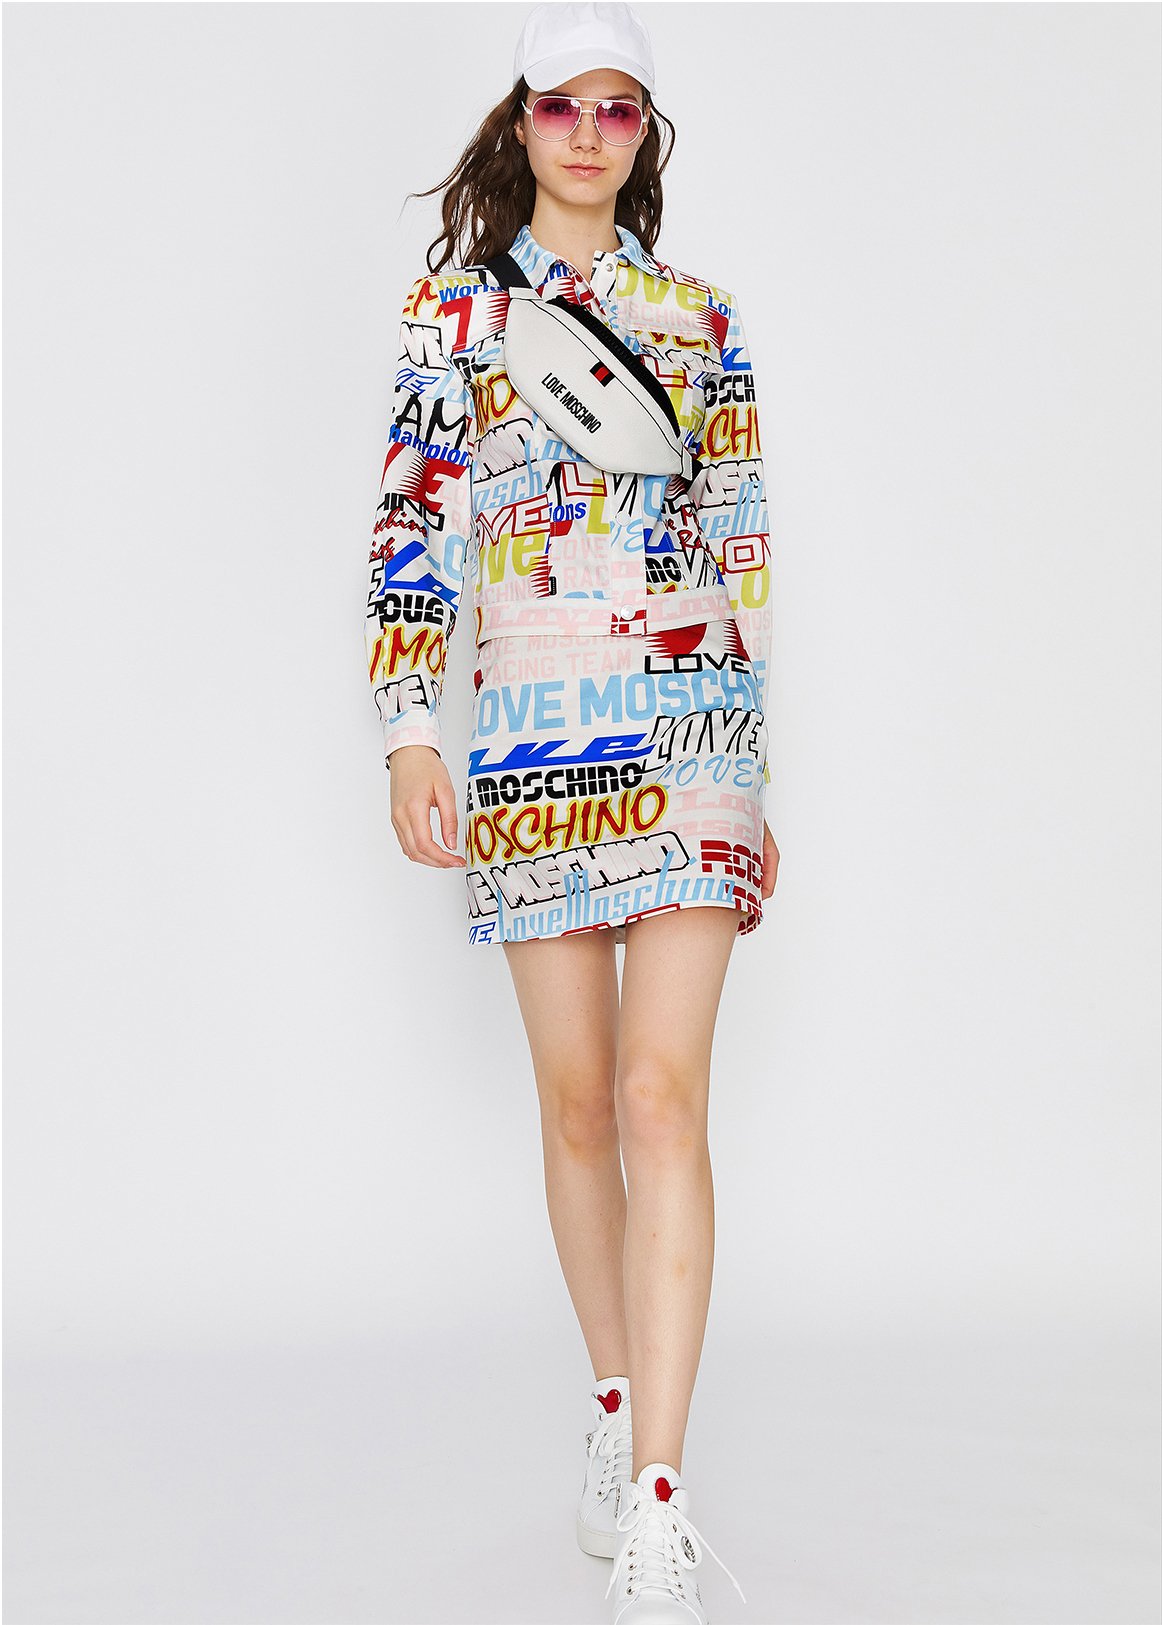 MOSCHINO: Love Moschino: the Collection is online! | Milled